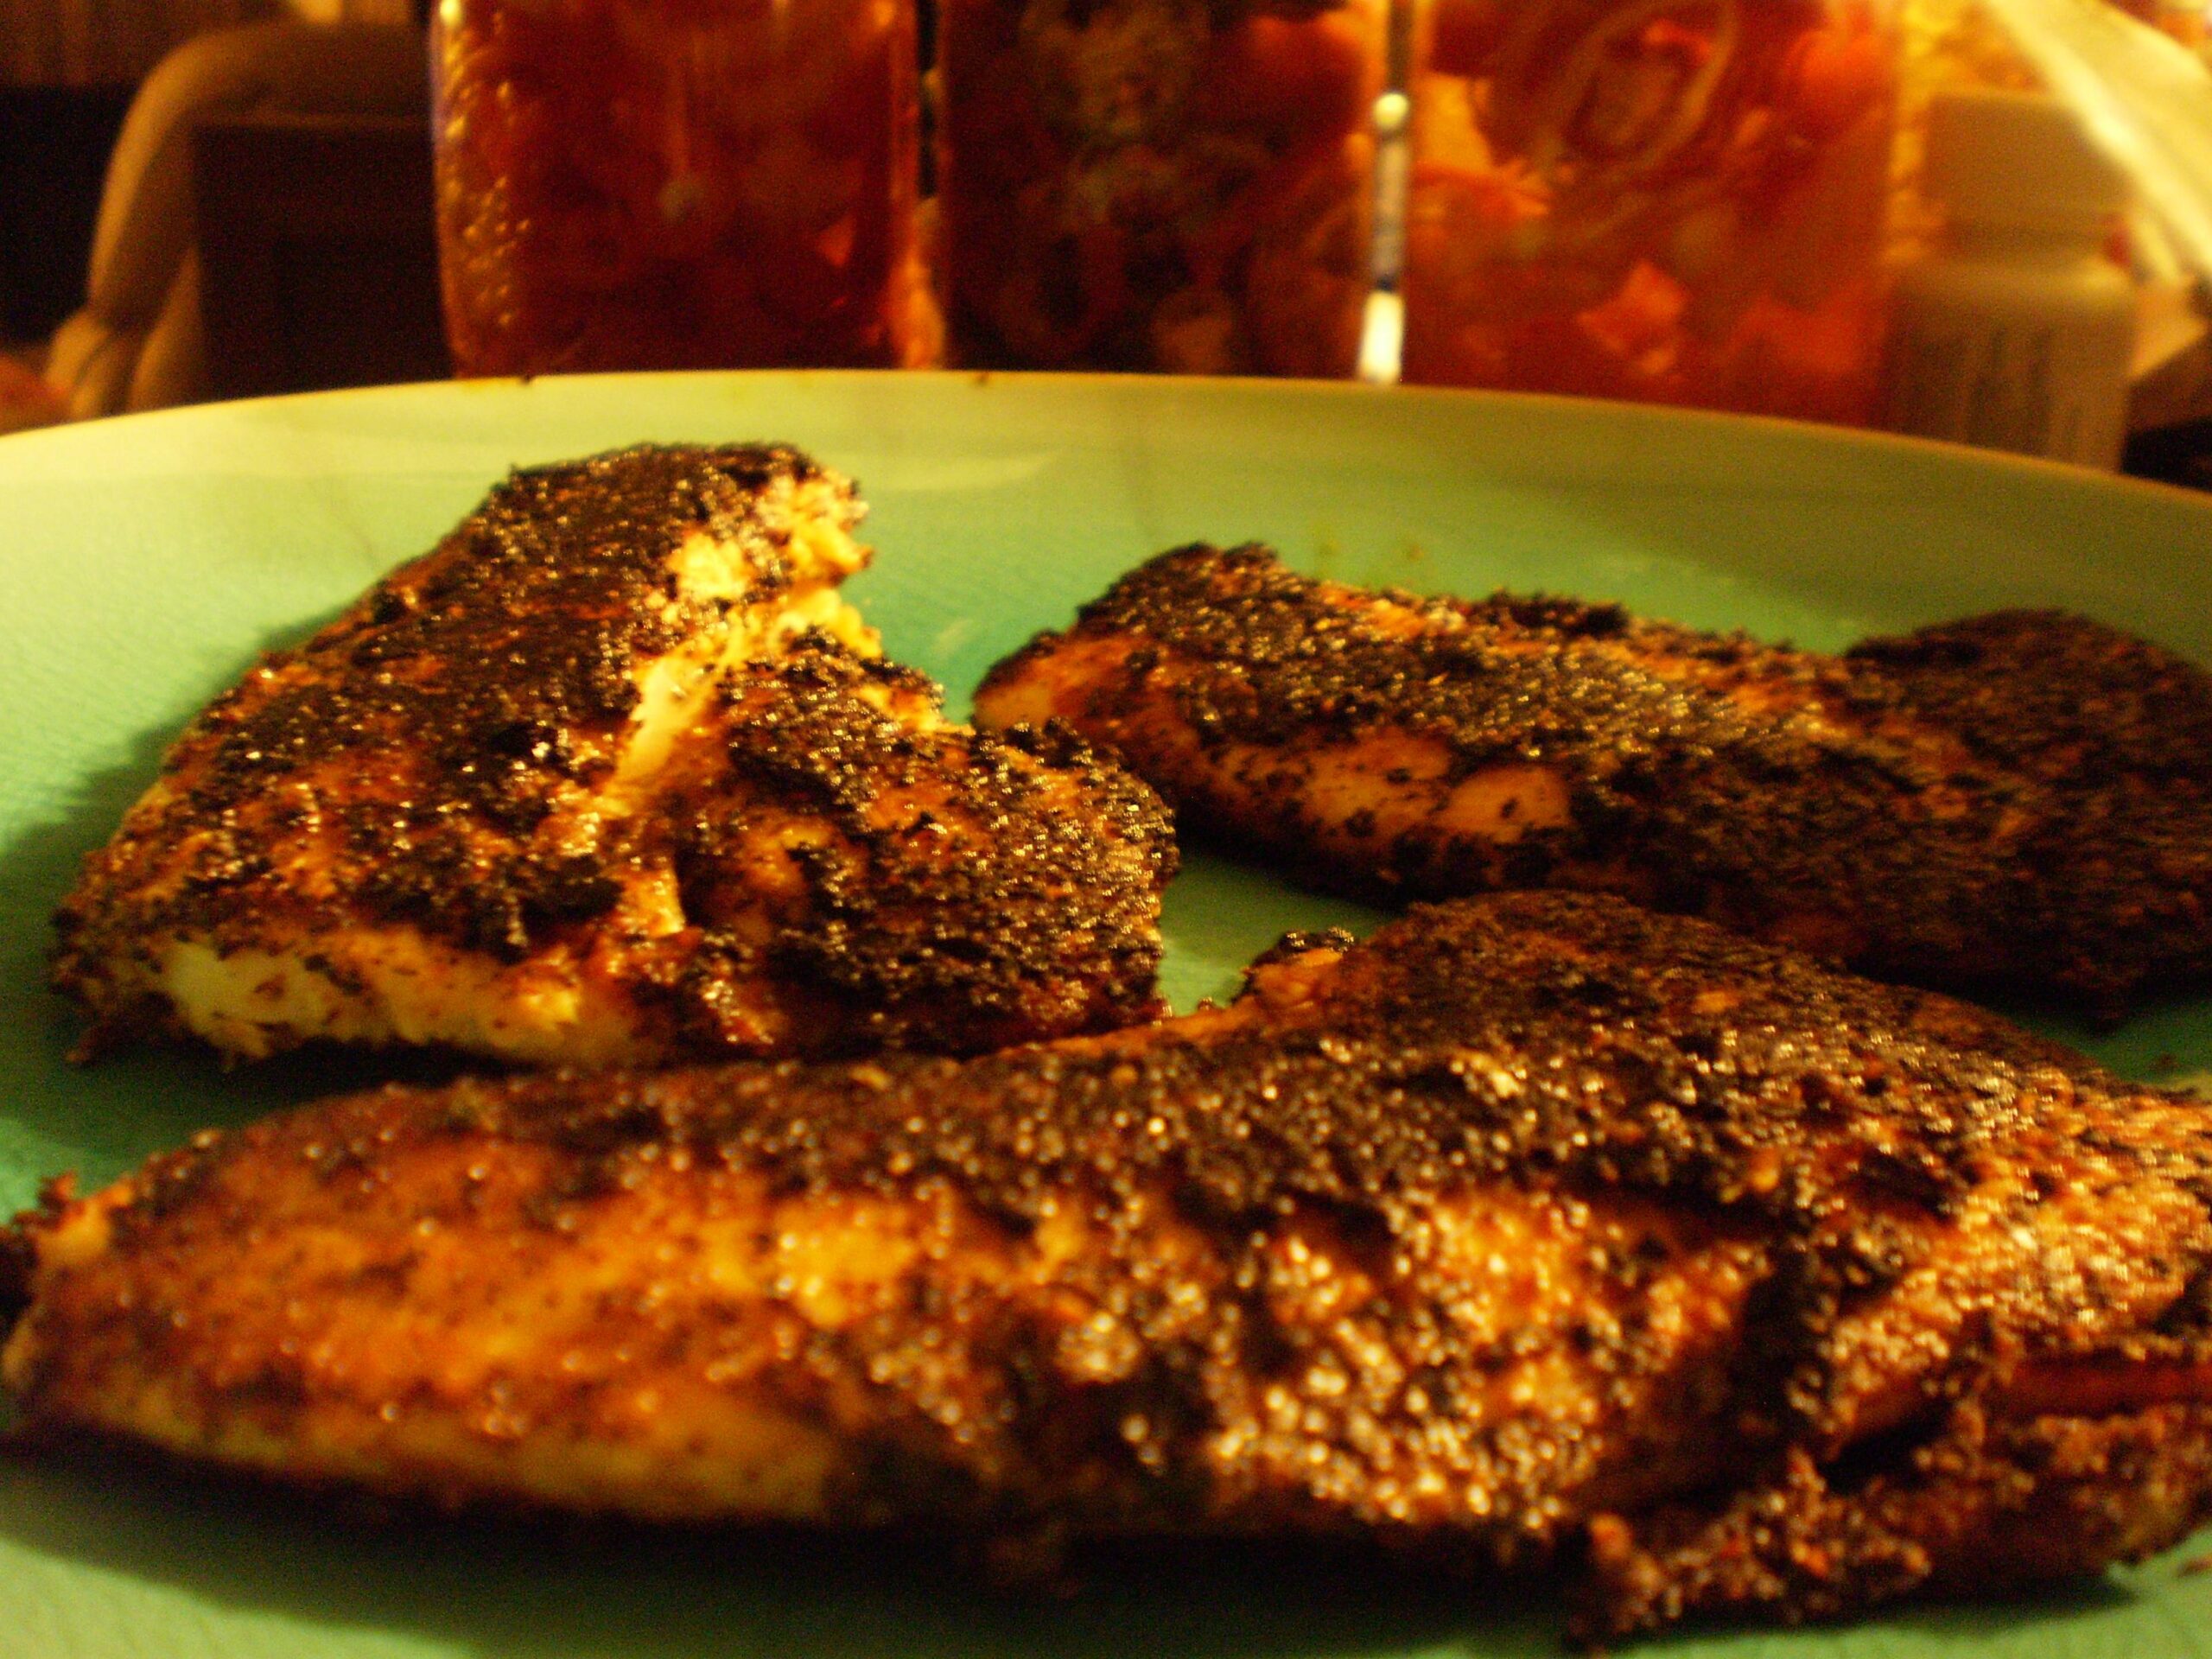 Delicious Blackened Tilapia Recipe with Mornay Wine Sauce